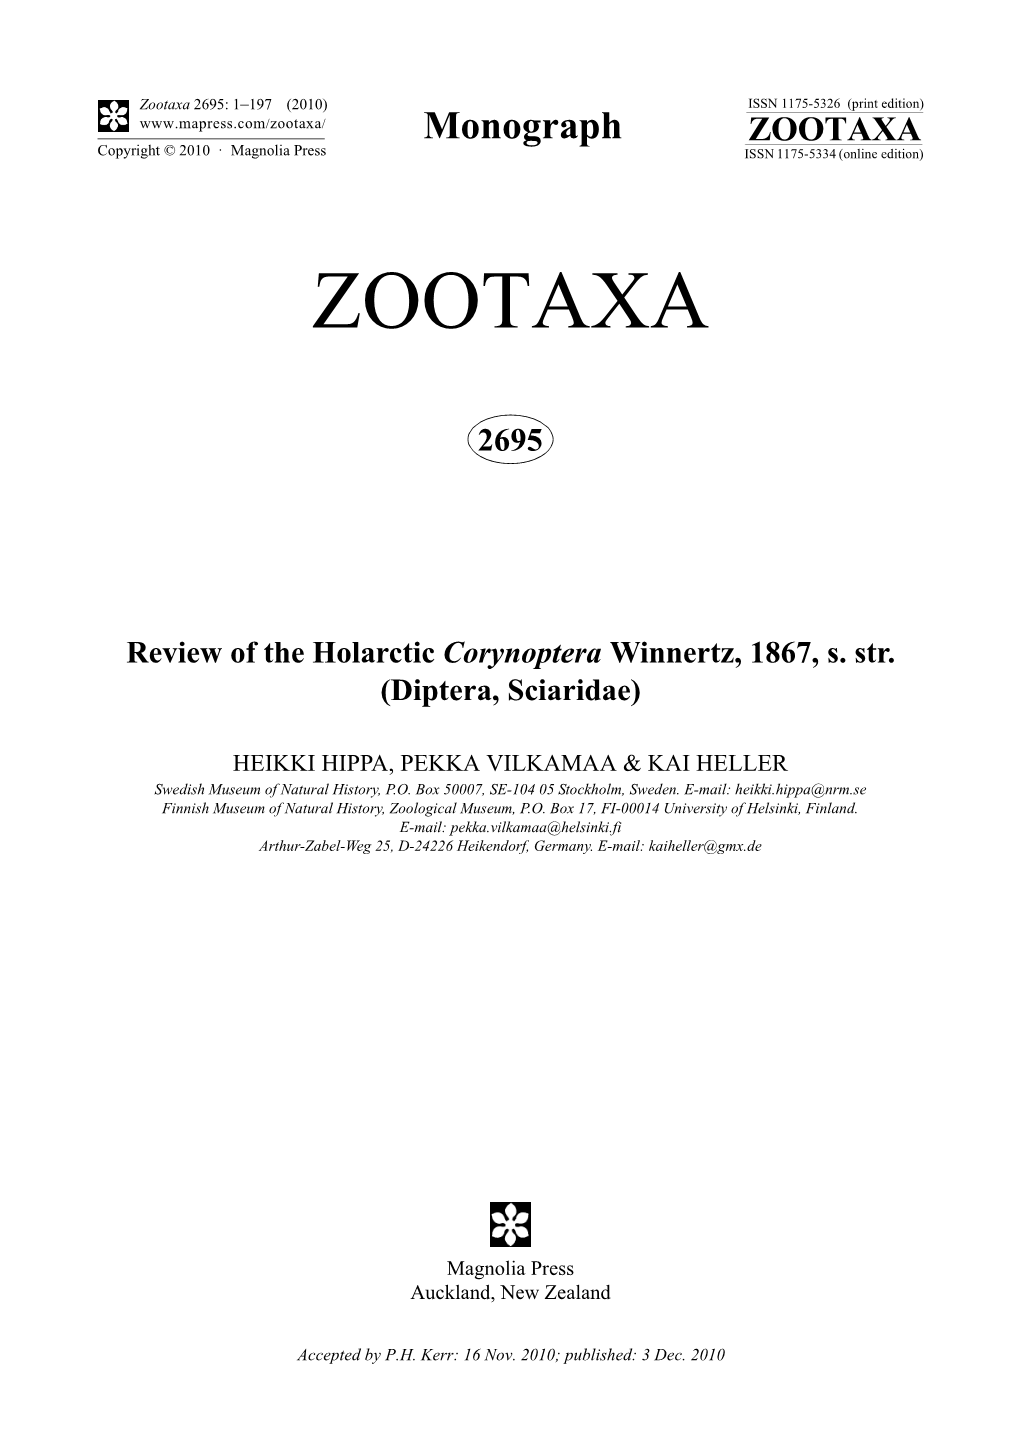 Review of the Holarctic Corynoptera Winnertz, 1867, S